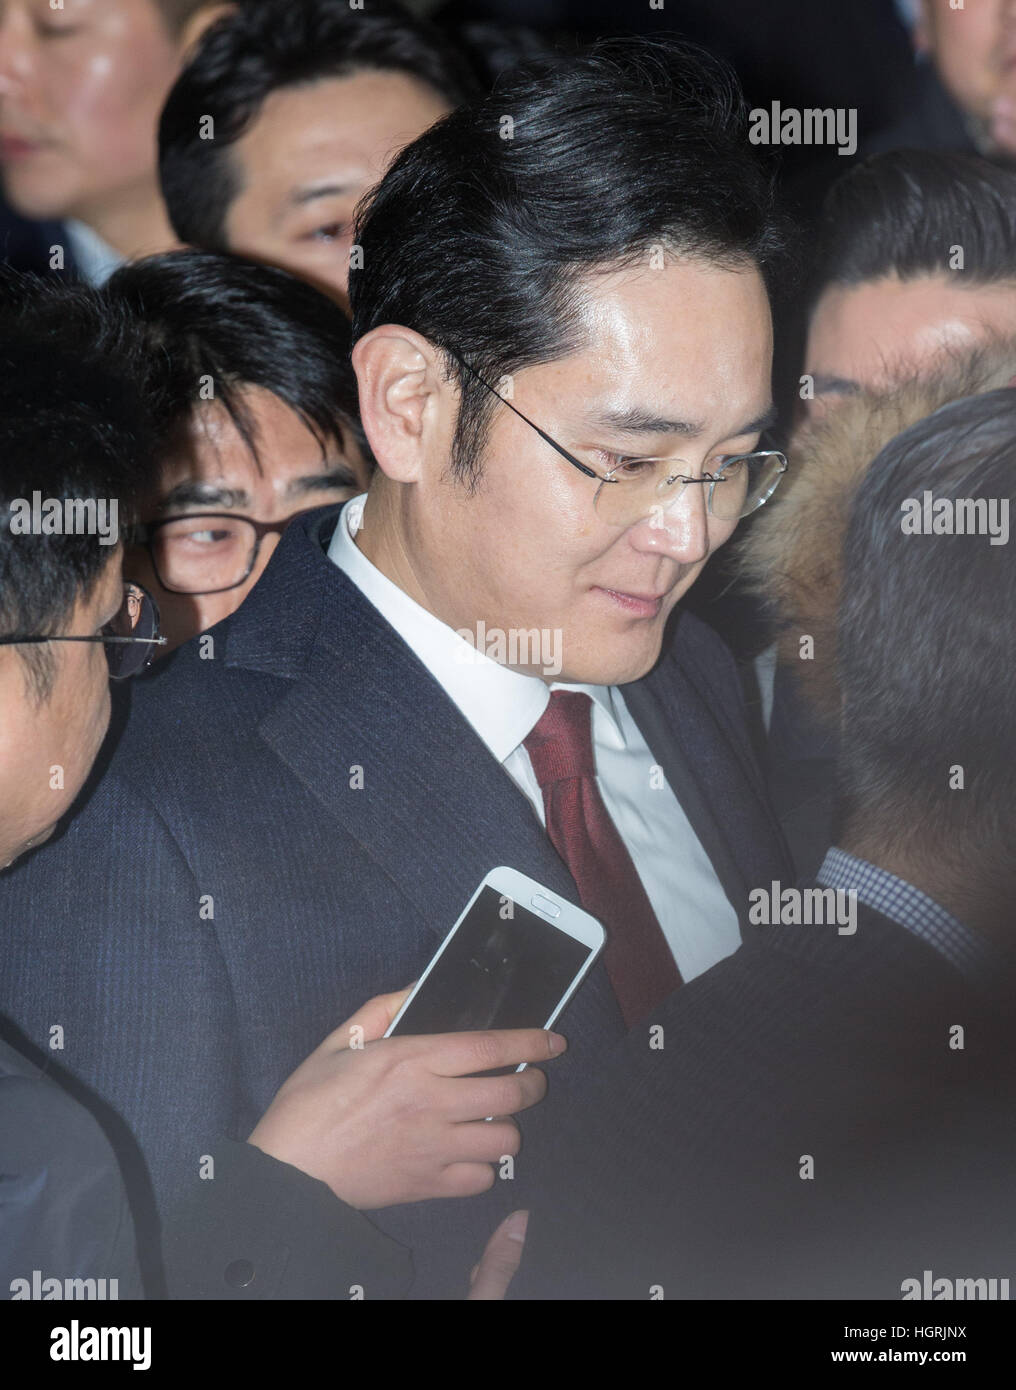 Seoul, South Korea. 12th Jan, 2017. Samsung Electronics Vice Chairman Lee Jae-yong receives interviews before questioning in Seoul, South Korea, Jan. 12, 2017. The heir apparent of Samsung Group, South Korea's largest conglomerate, appeared in the office of an independent counsel team investigating a scandal involving impeached President Park Geun-hye for his alleged involvement in bribery charges. © Lee Sang-ho/Xinhua/Alamy Live News Stock Photo